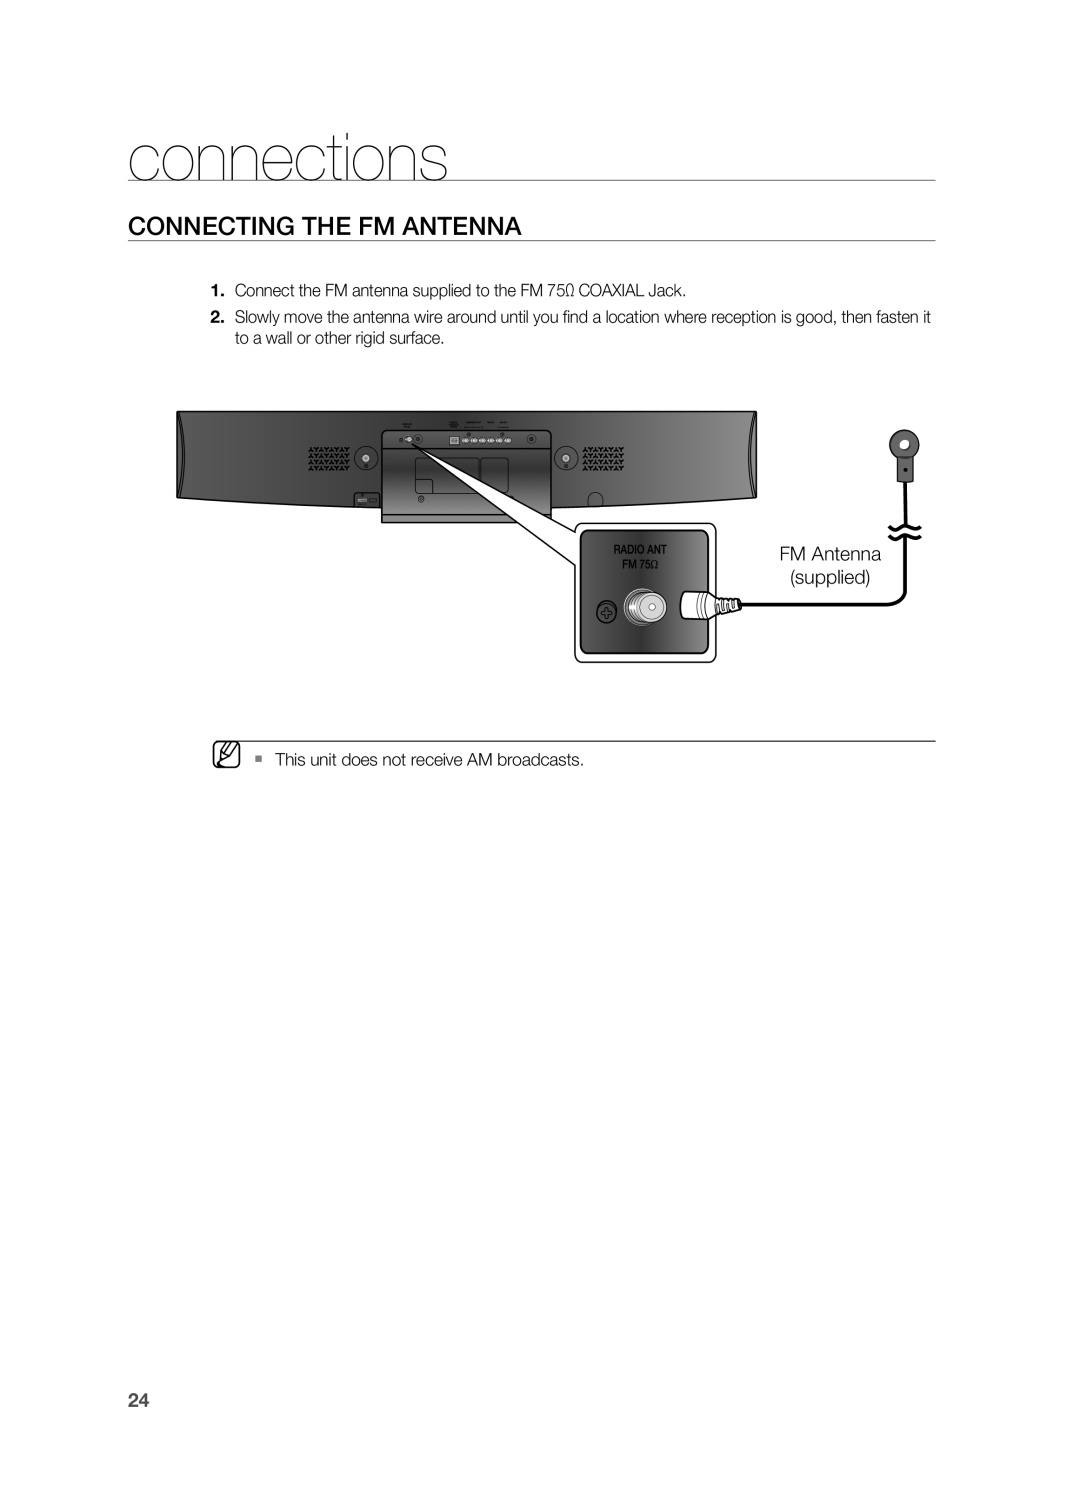 Samsung HT-X810 user manual Connecting the FM Antenna, connections, FM Antenna supplied 